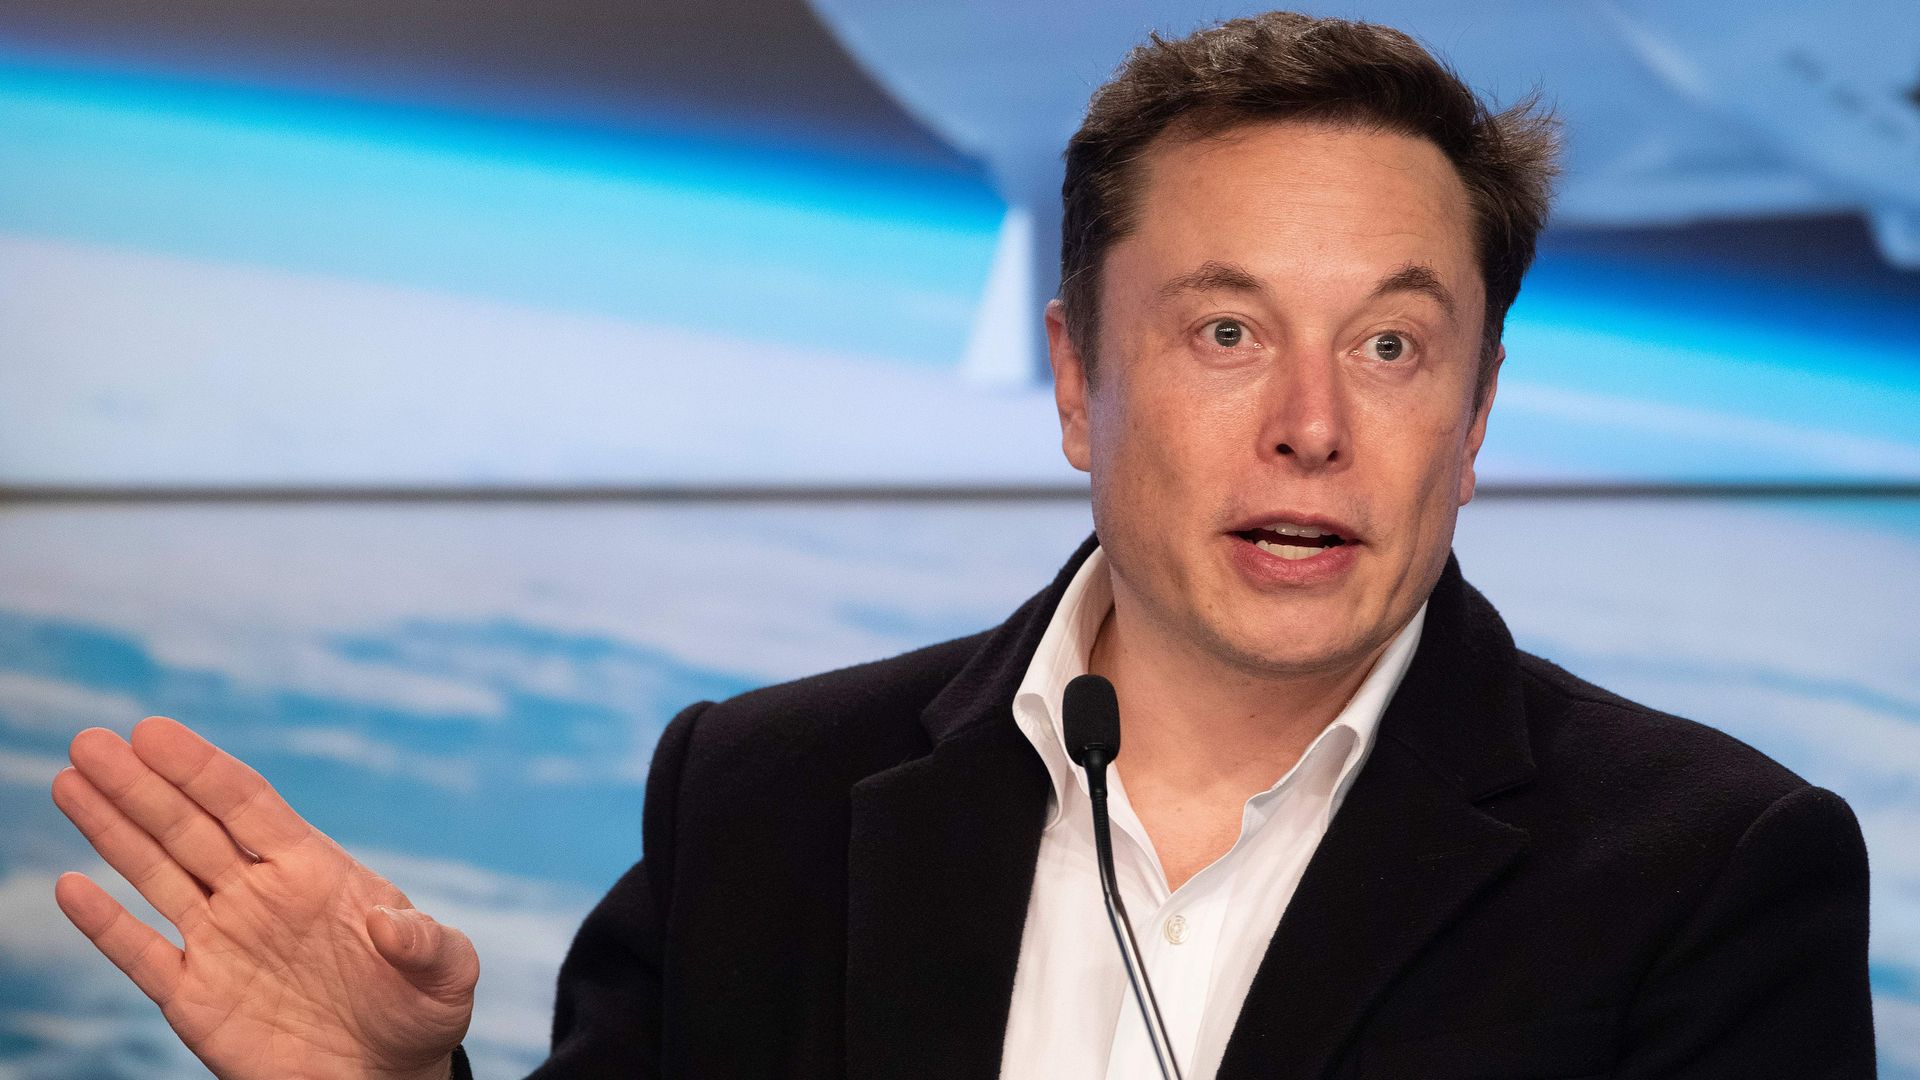 The SEC says Elon Musk brazenly disregarded a federal judge's order.